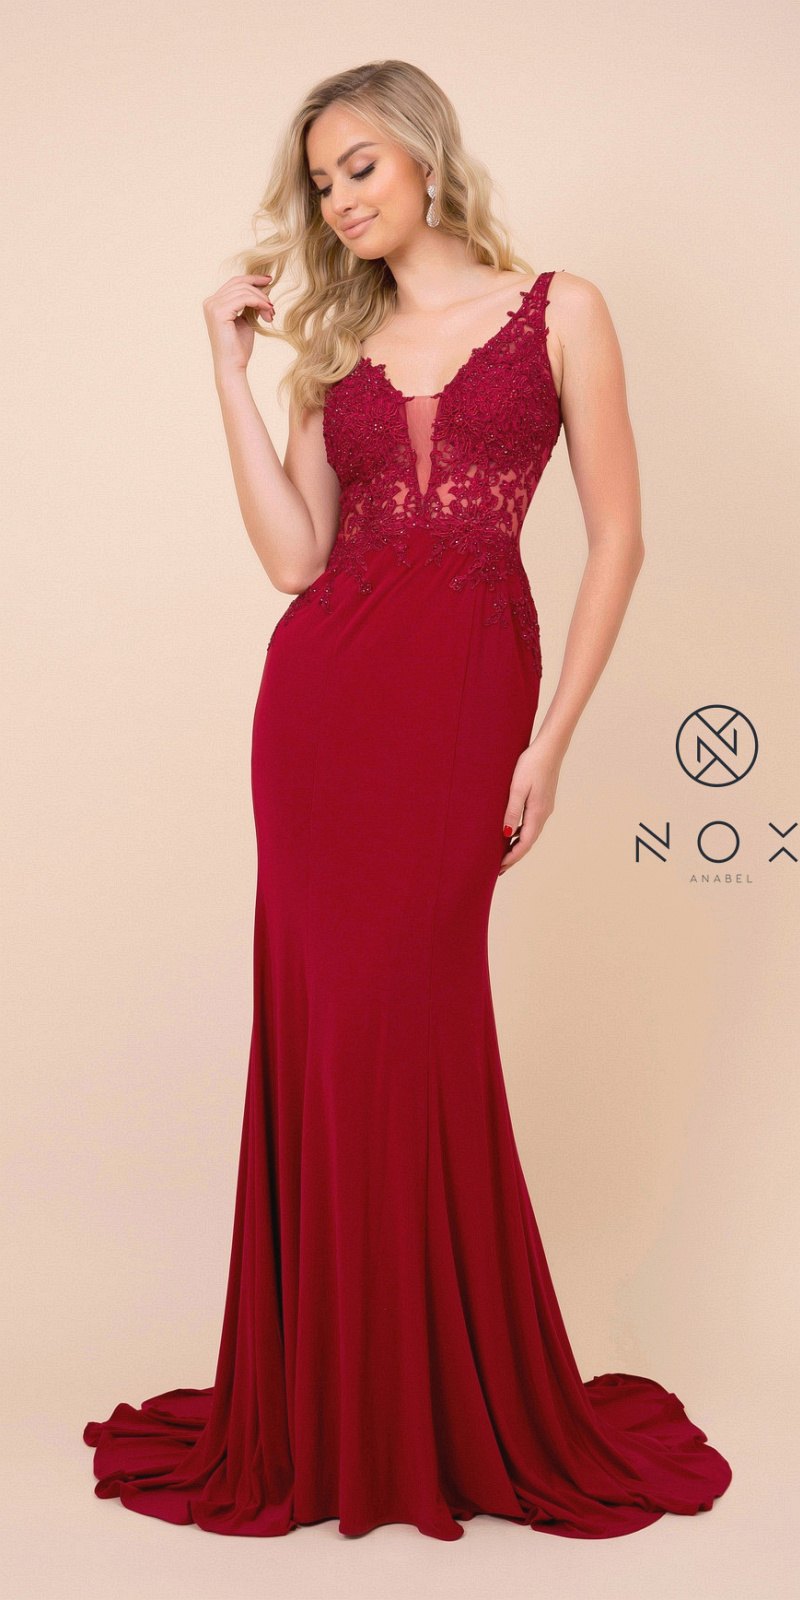 Burgundy Appliqued Fit and Flare Long Prom Dress